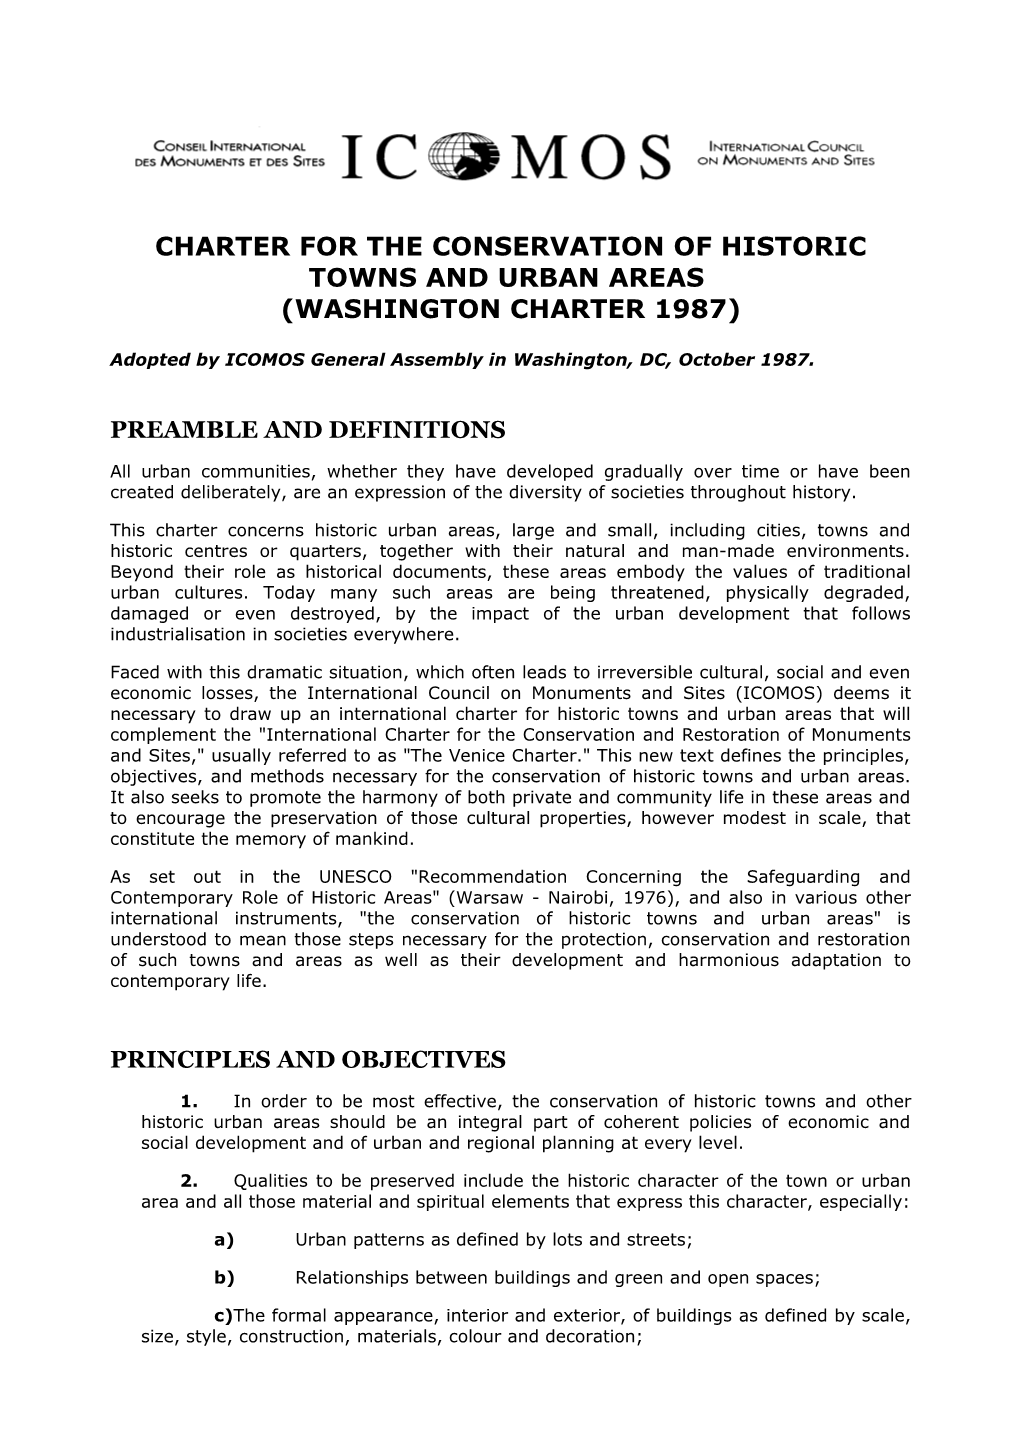 Charter on the Conservation of Historic Towns